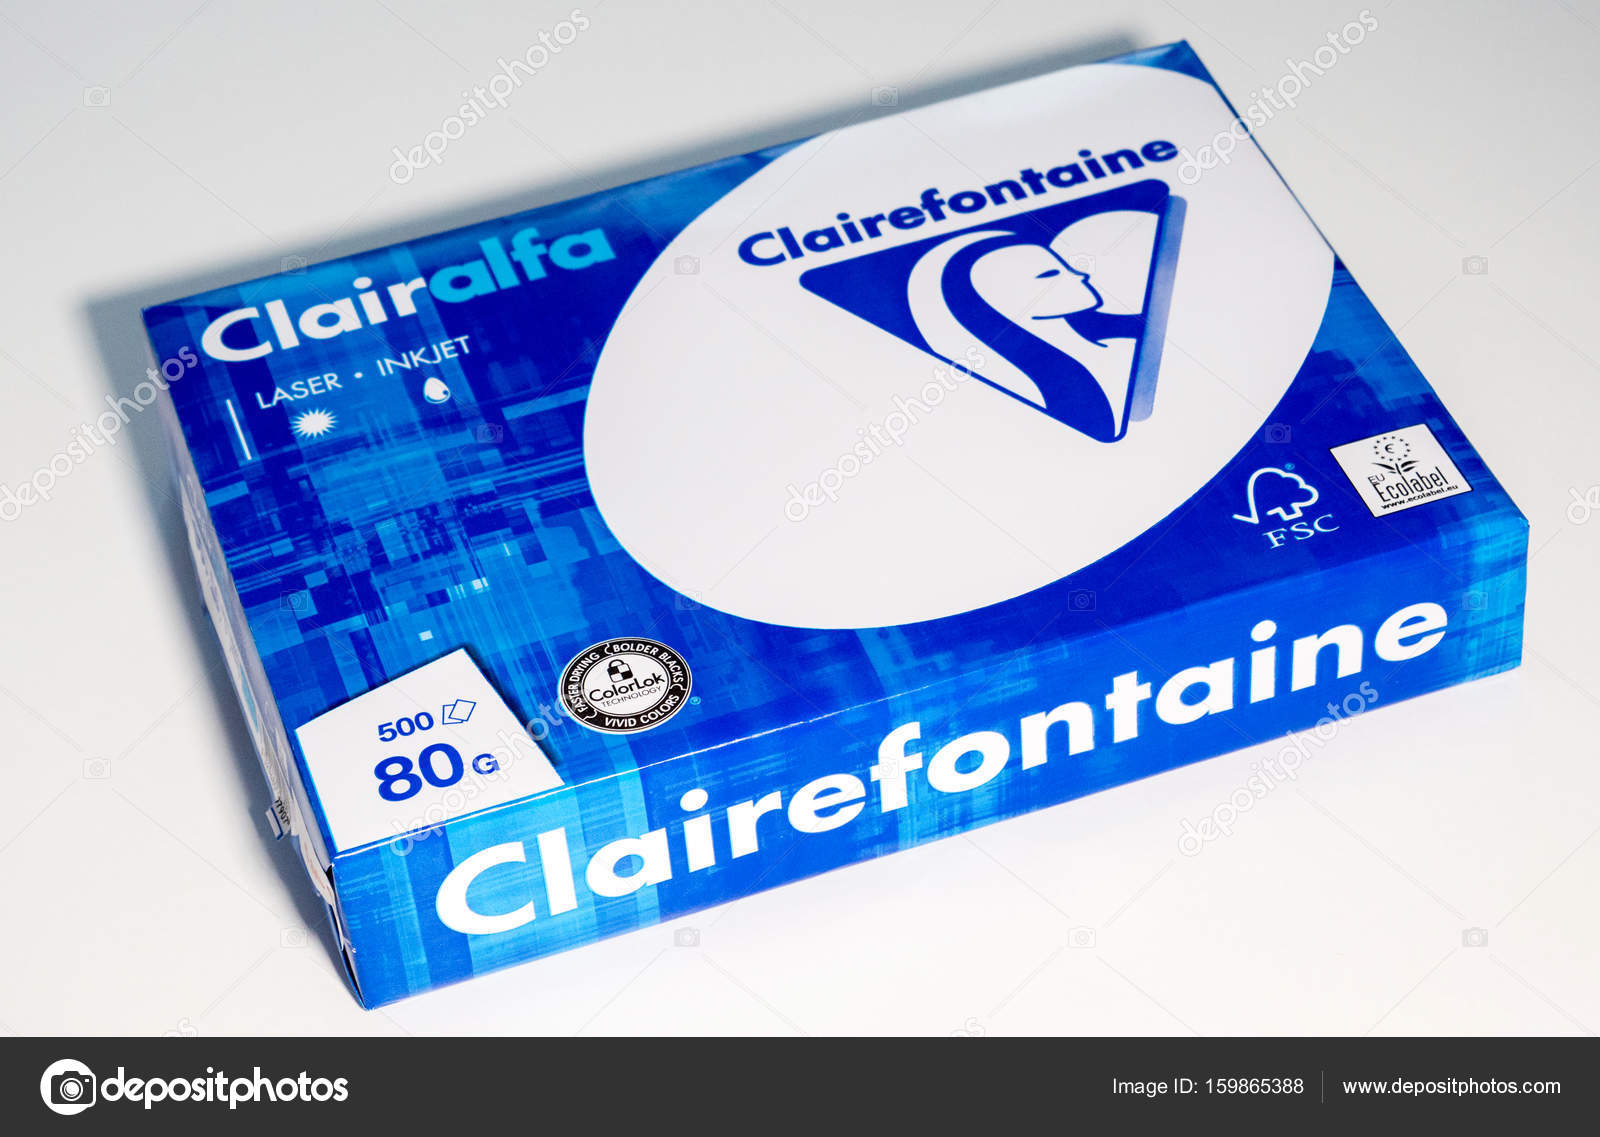 Package of A4 paper box made by Clairefontaine – Stock Editorial Photo ©  ifeelstock #159865388